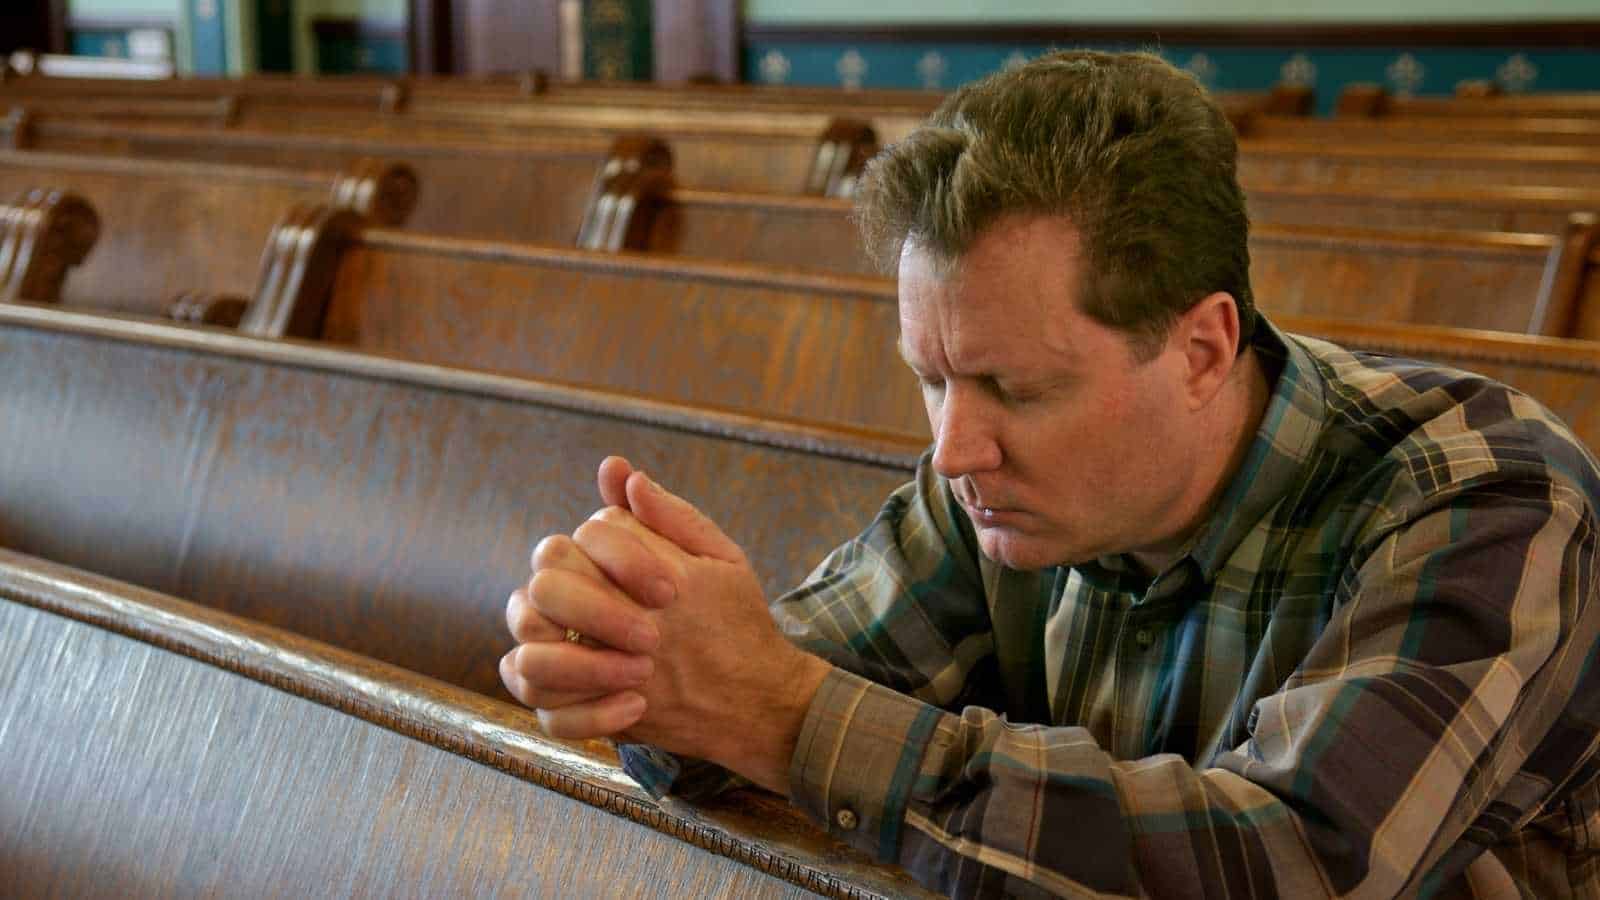 Harvard Study Links Church Attendance and Reduced Depression